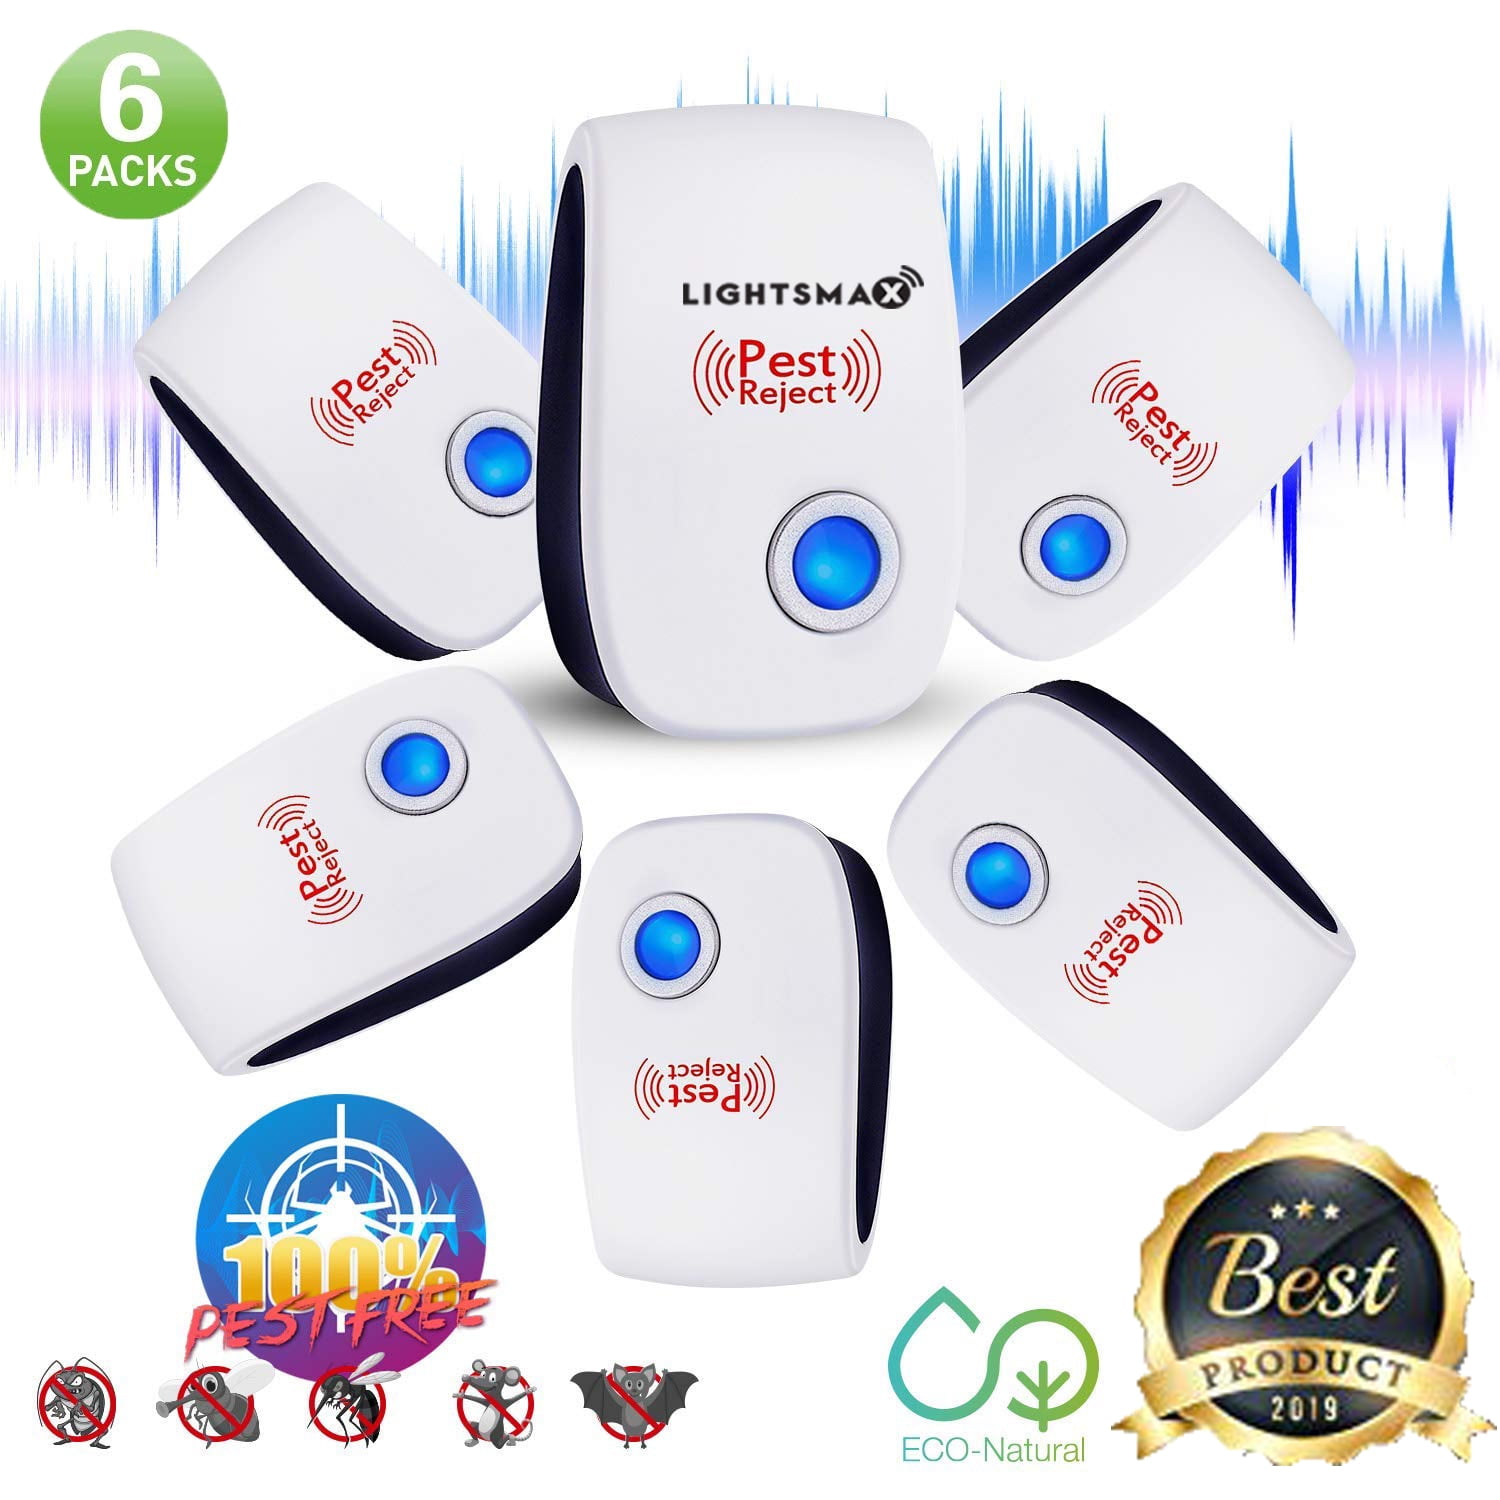 6 PKS [2018 NEW UPGRADED] LIGHTSMAX - Ultrasonic Pest Repeller - Electronic  Plug -In Pest Control Ultrasonic - Best Repellent for Cockroach Rodents  Flies Roaches Ants Mice Spiders Fleas Indoor 